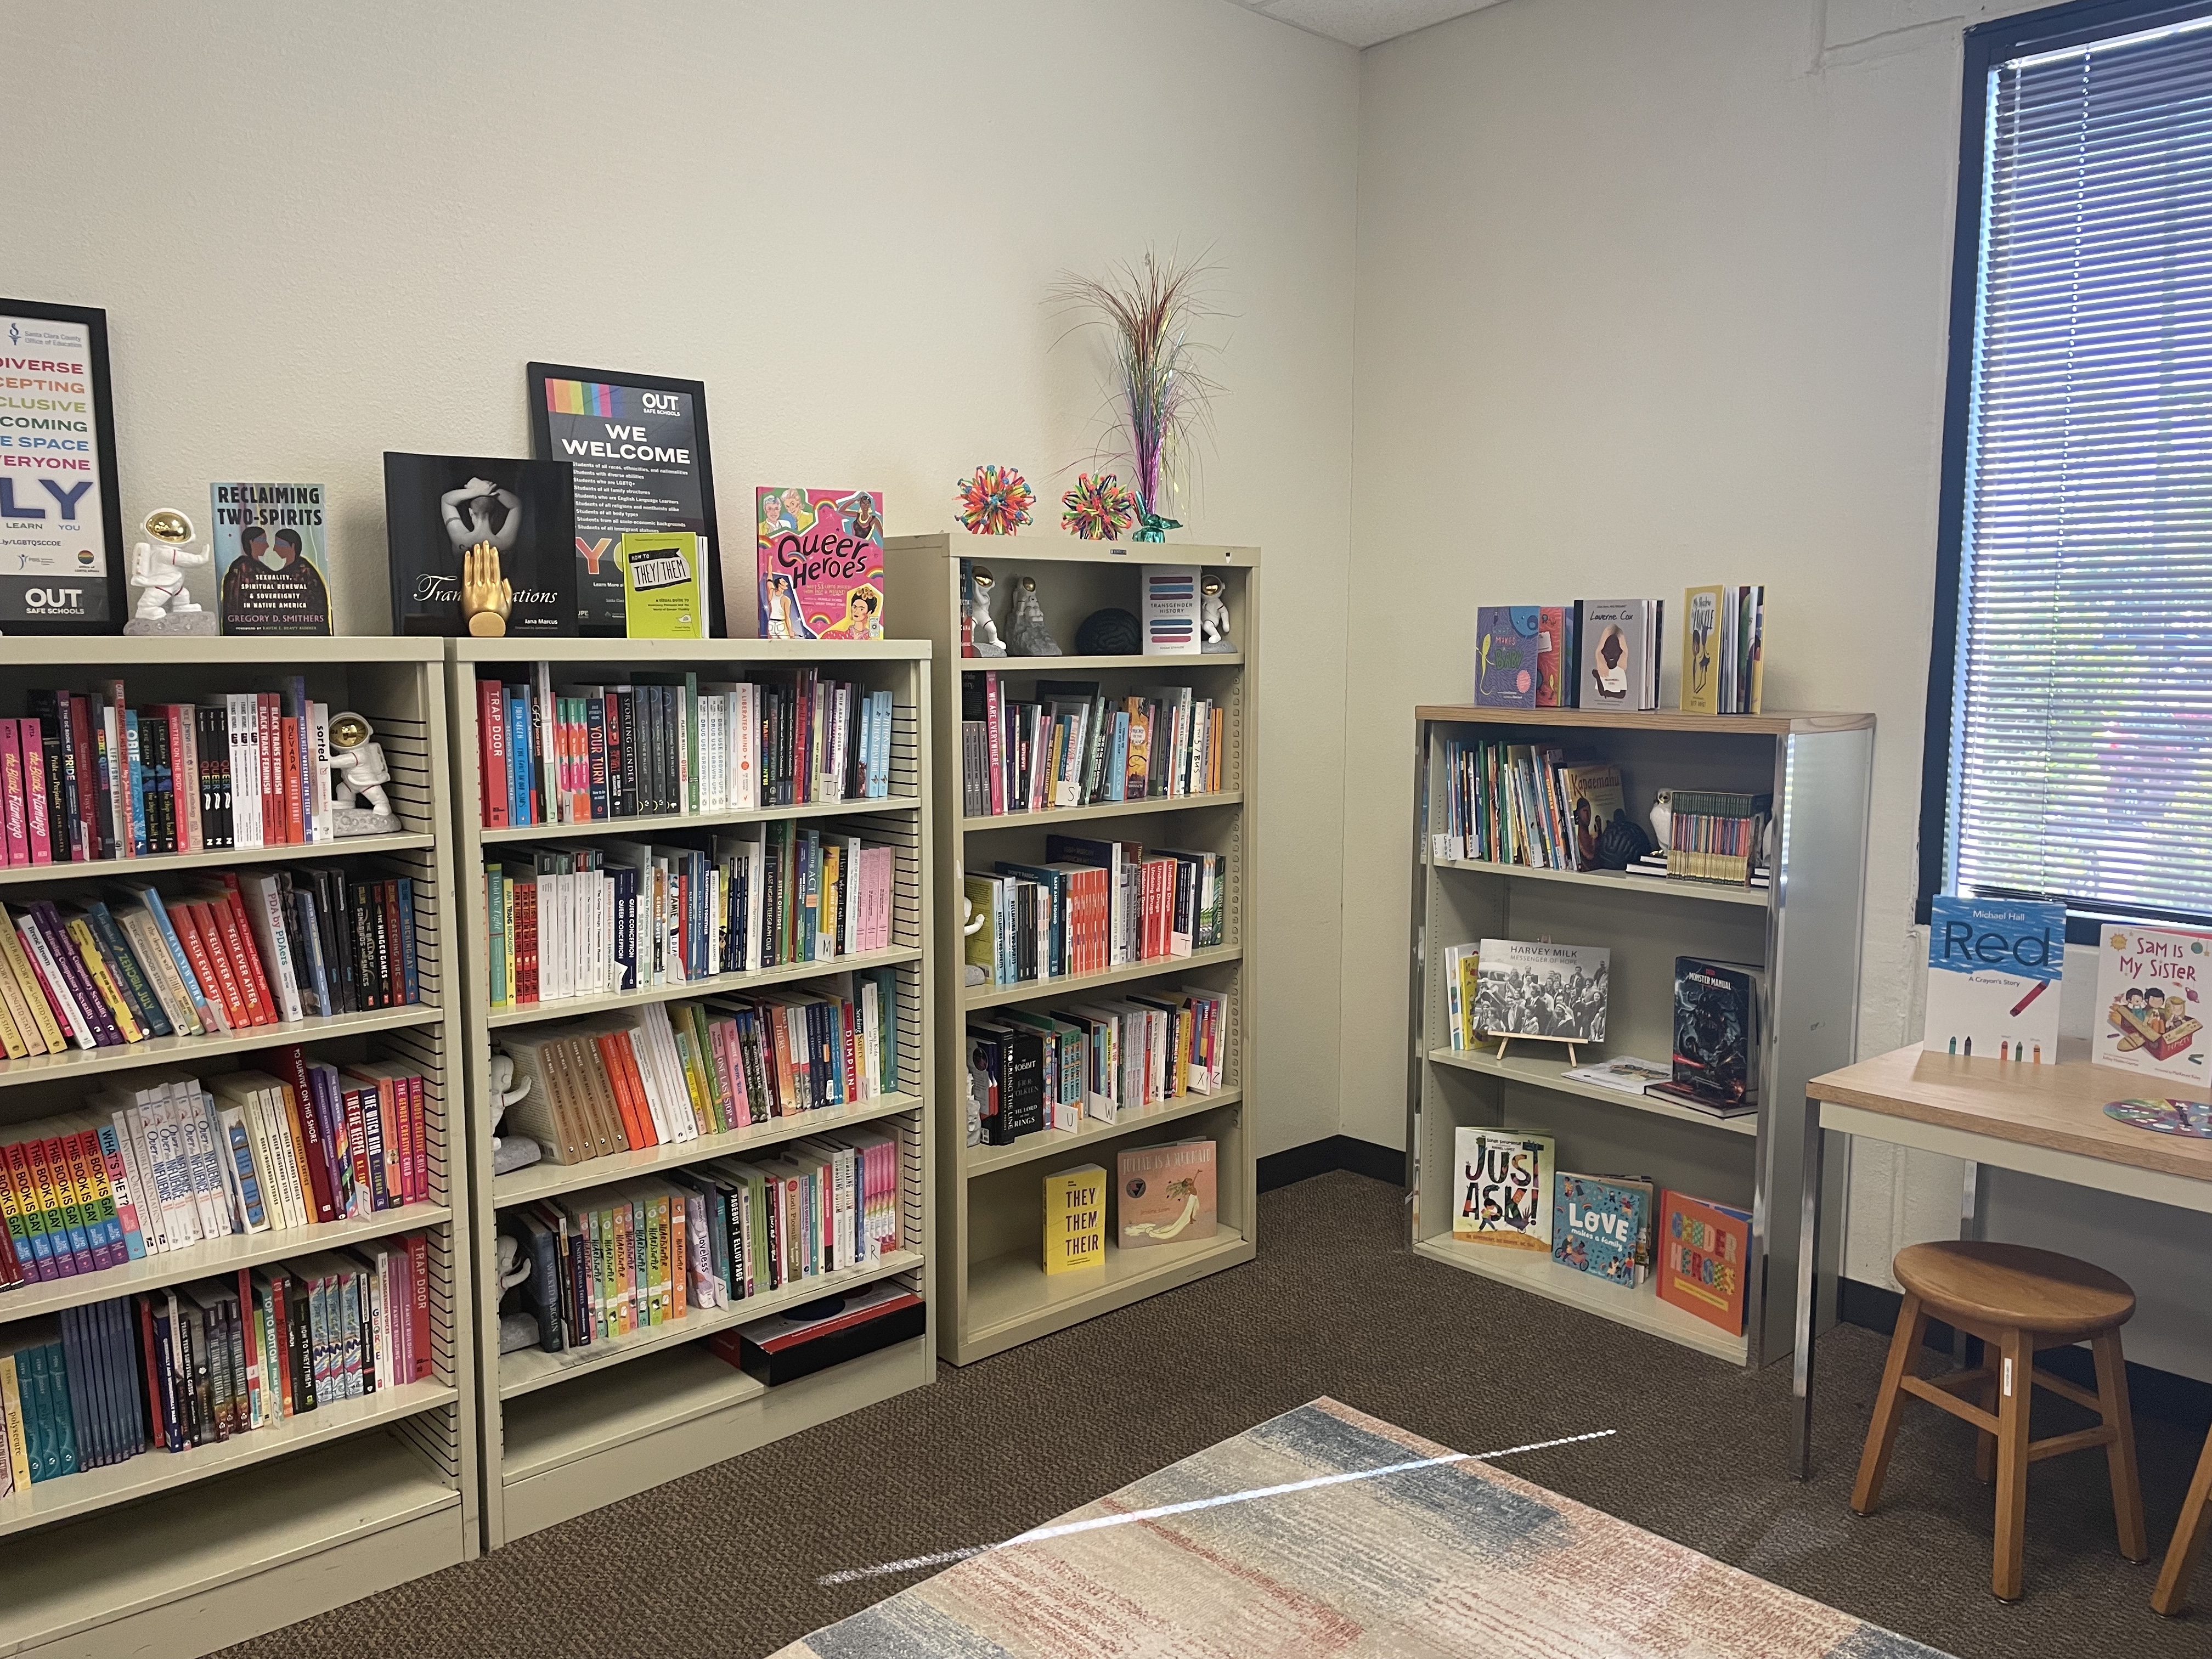 The clinic houses a library of literature focused on the queer and gender diverse experience.